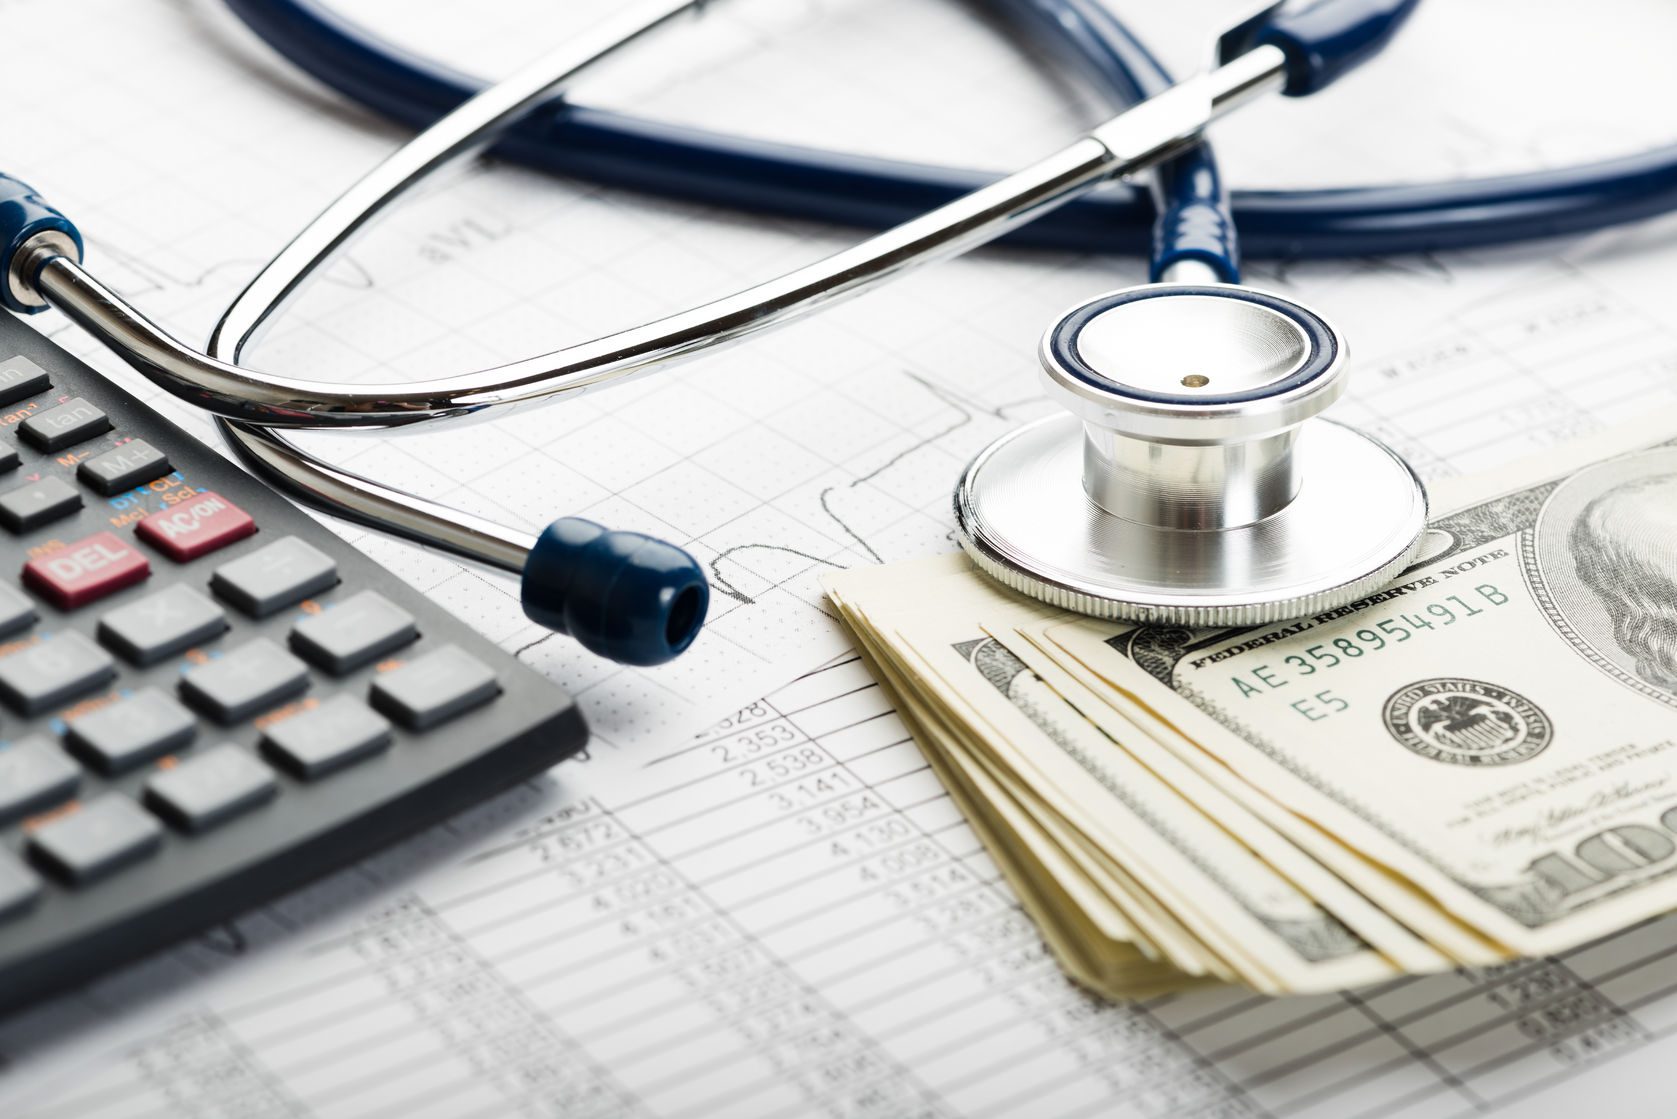 health care costs. stethoscope and calculator symbol for health care costs or medical insurance